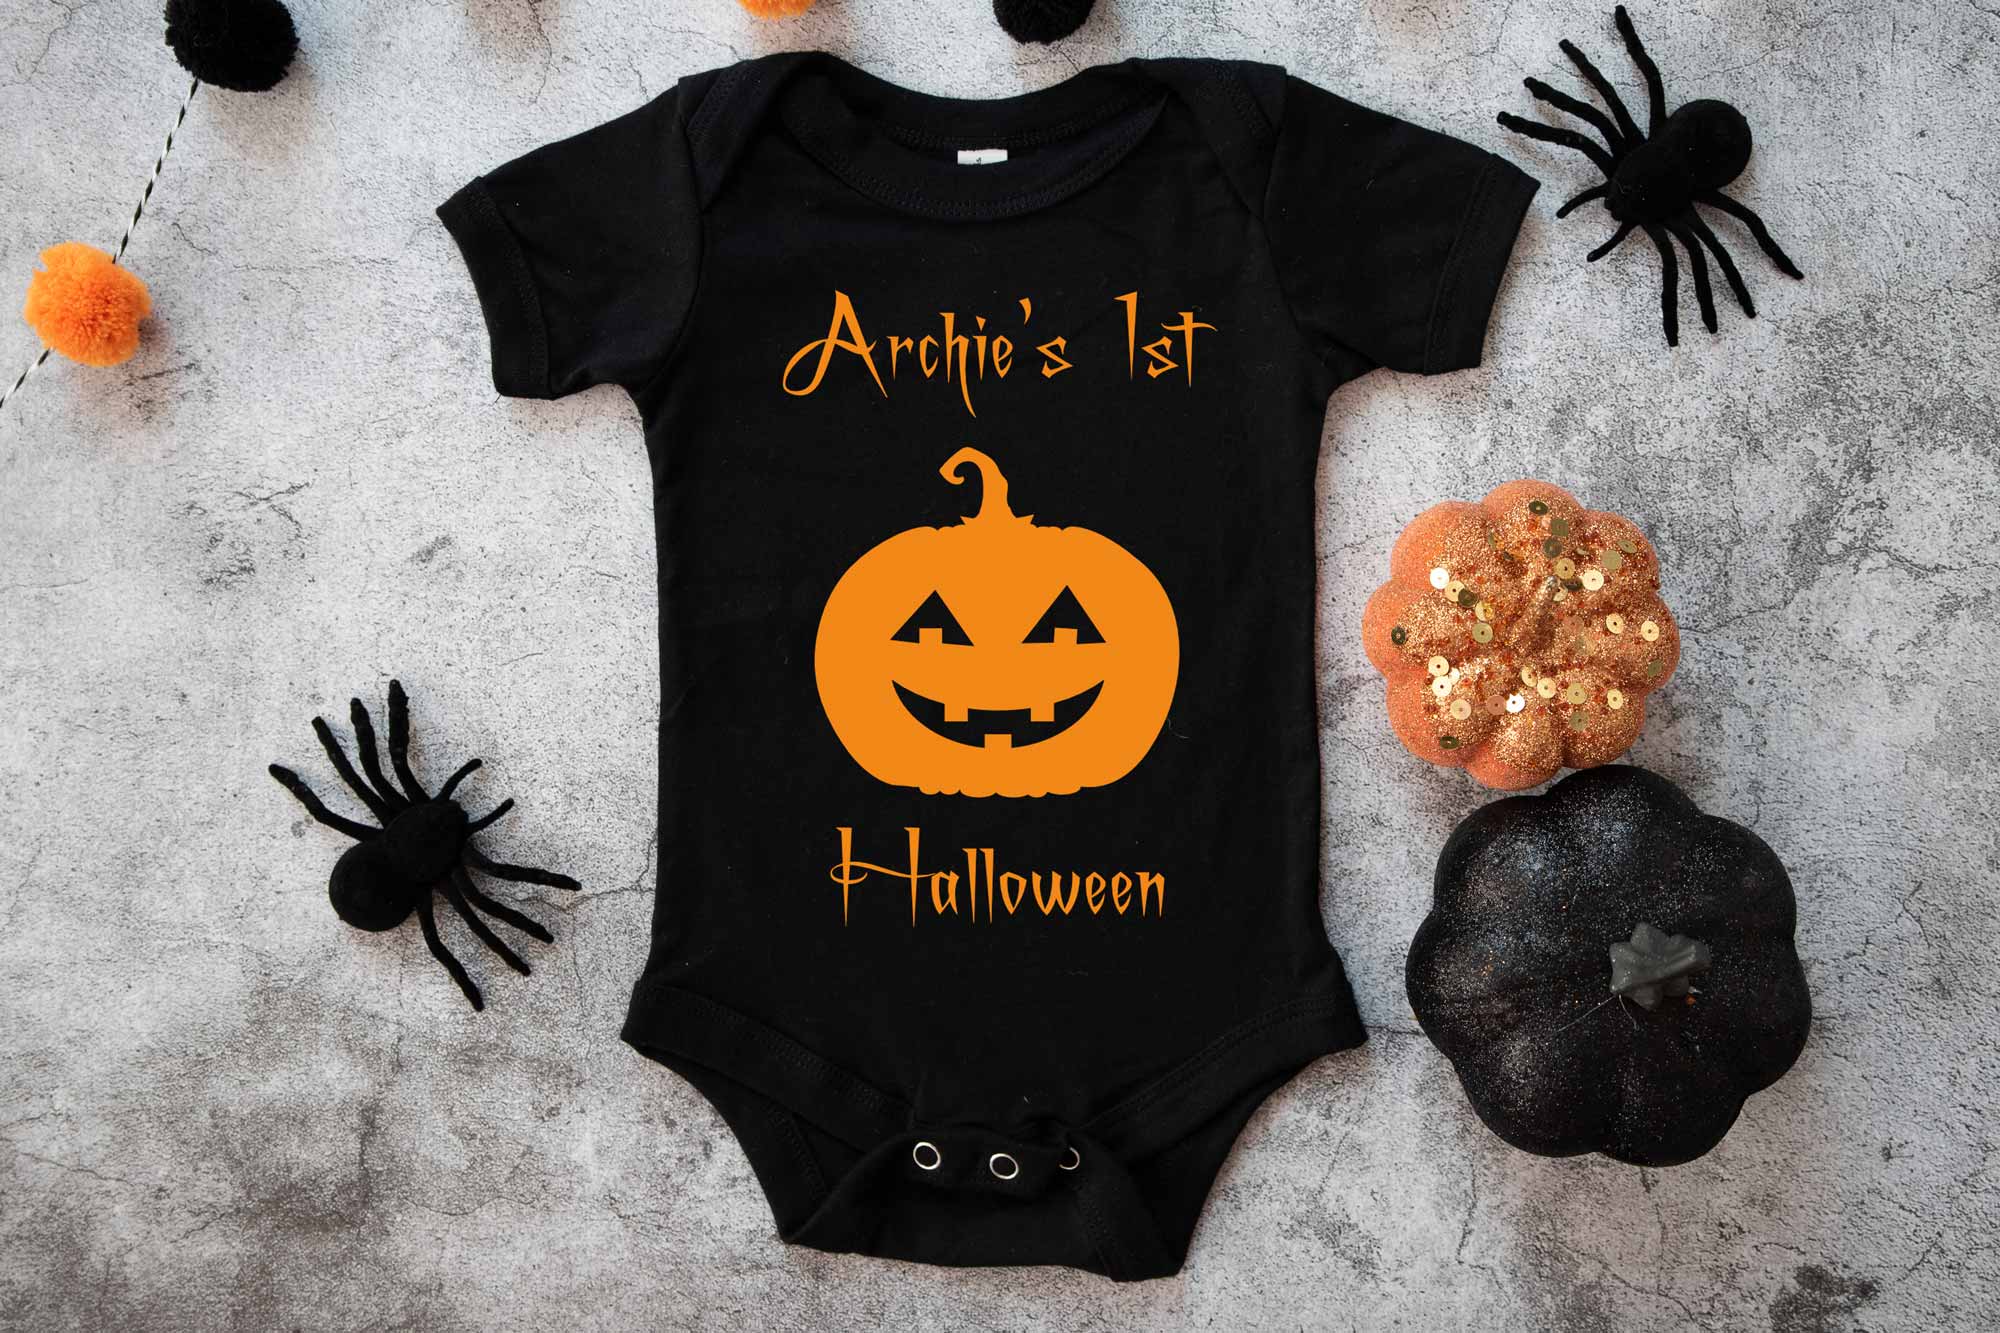 Black baby's first halloween onesie on a spooky background